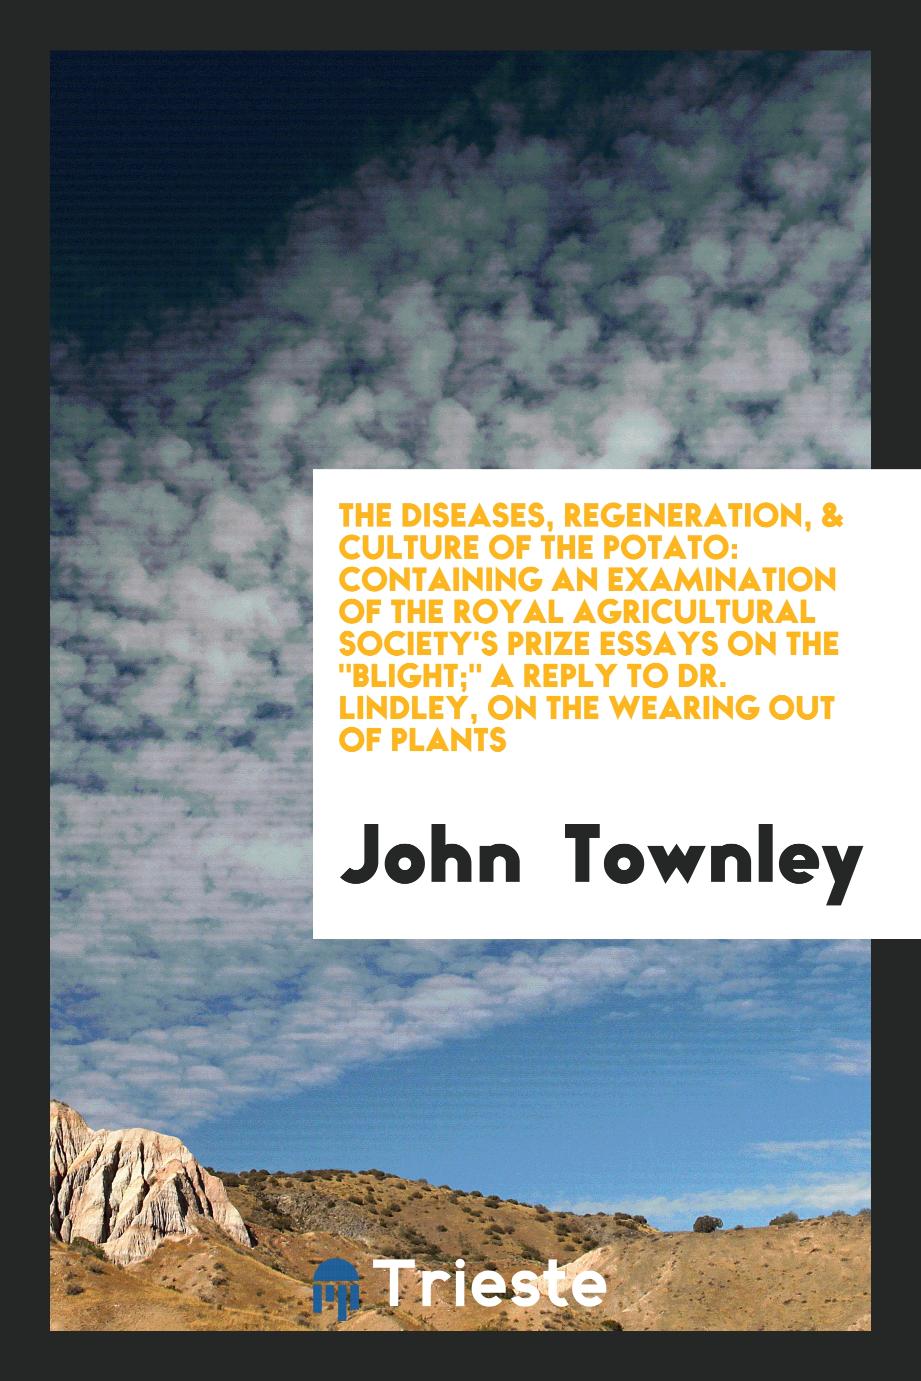 John  Townley - The Diseases, Regeneration, & Culture of the Potato: Containing an Examination of the Royal Agricultural Society's Prize Essays on the "Blight;" A Reply to Dr. Lindley, on the Wearing Out of Plants